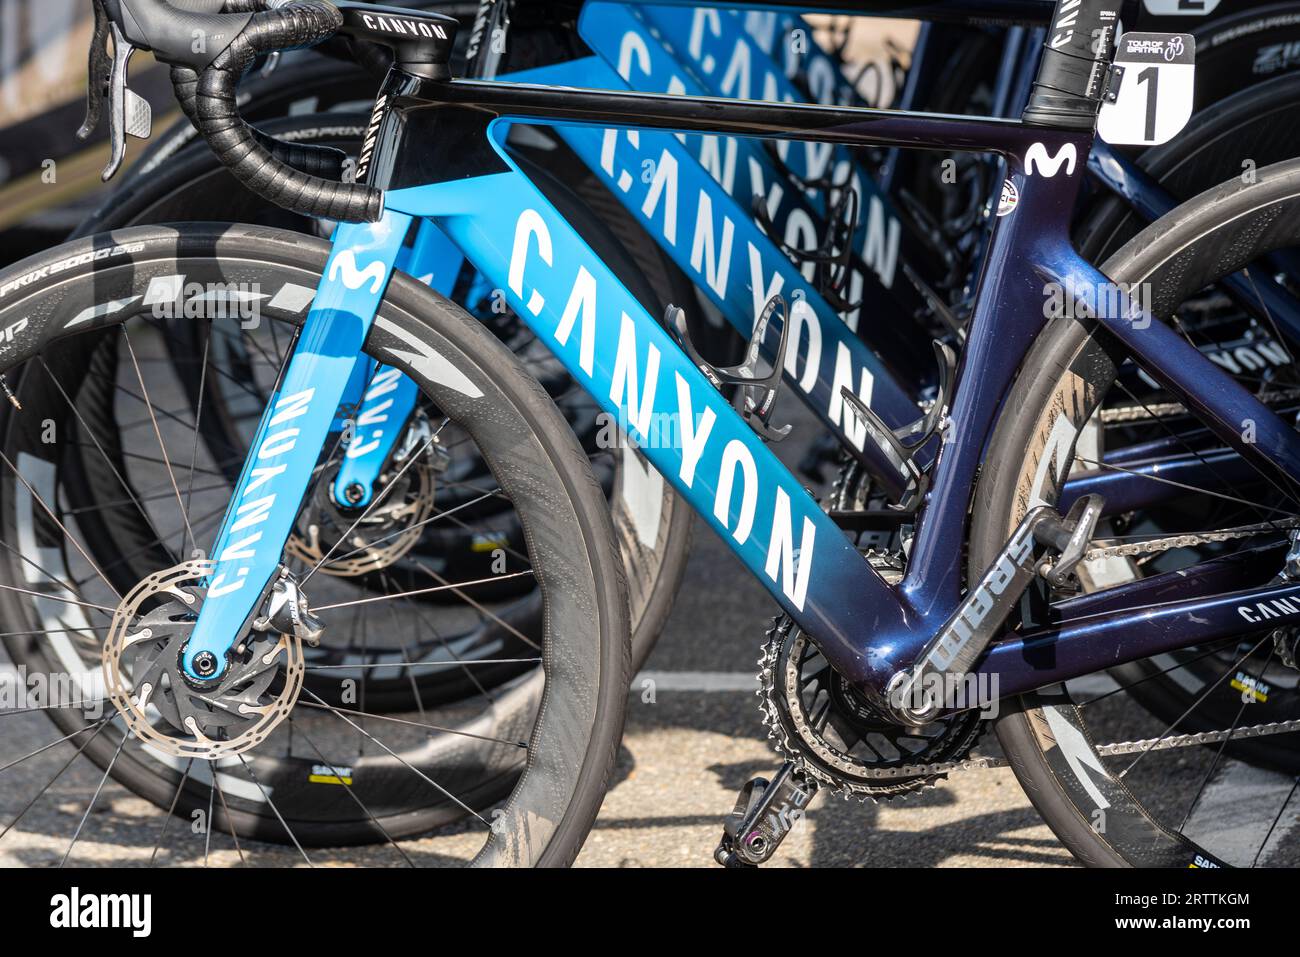 Canyon SRAM racing bicycles of team Movistar lined up at the Tour of Britain cycle race Stage 6 start in Southend on Sea, Essex, UK. Canyon Bicycles Stock Photo